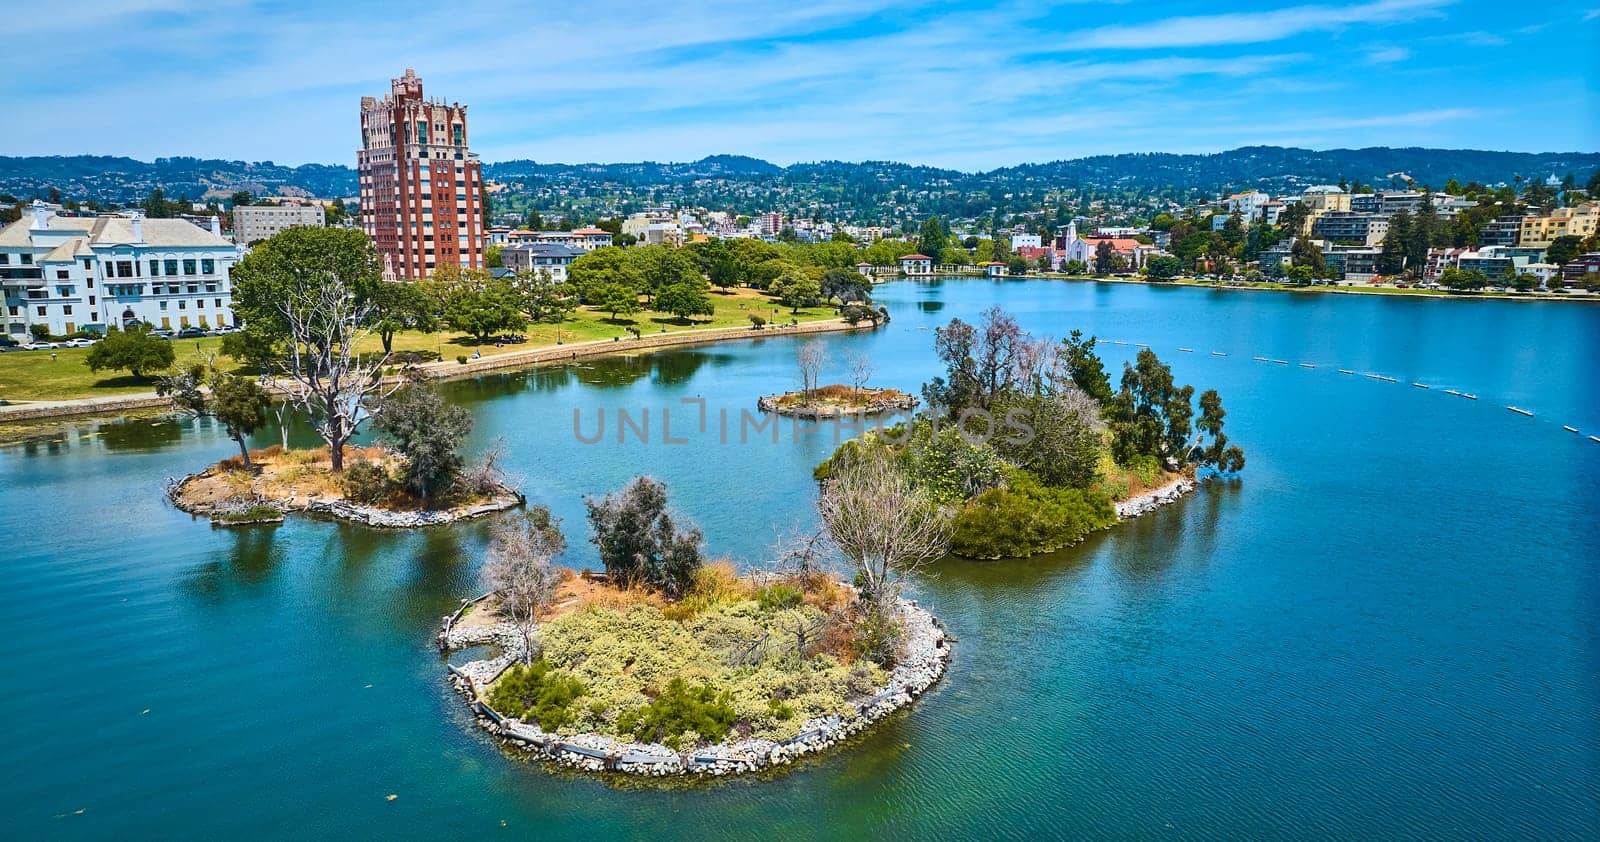 Image of Pelican Island on Lake Merritt with low aerial of Oakland City residential area